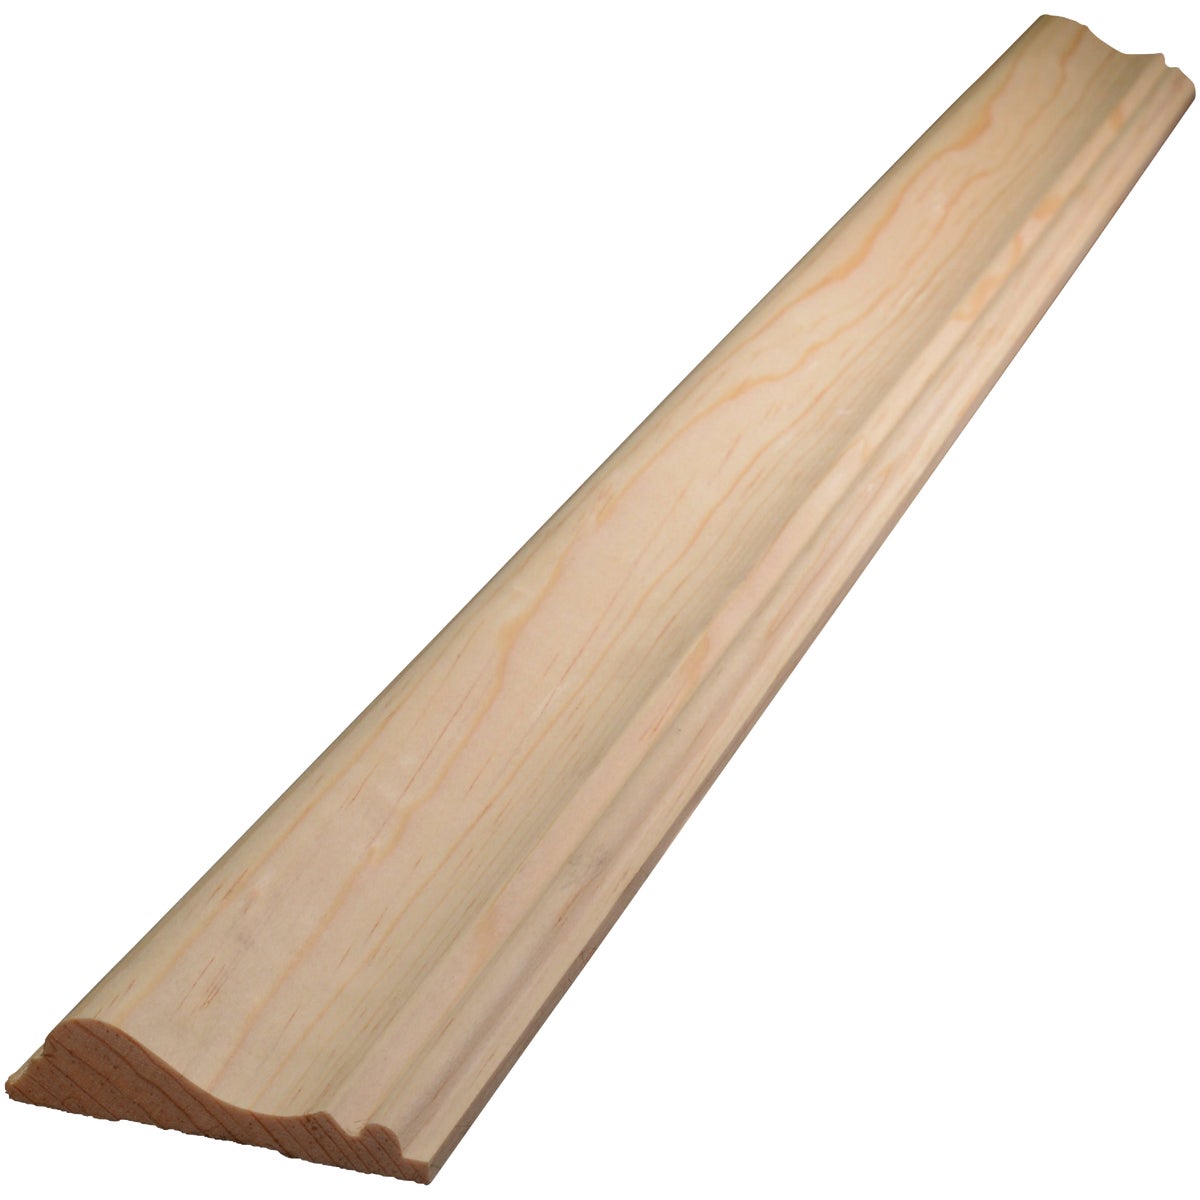 Alexandria Moulding 11/16 In. W. x 2-5/8 In. H. x 8 Ft. L. Solid Pine Colonial Chair Rail Molding